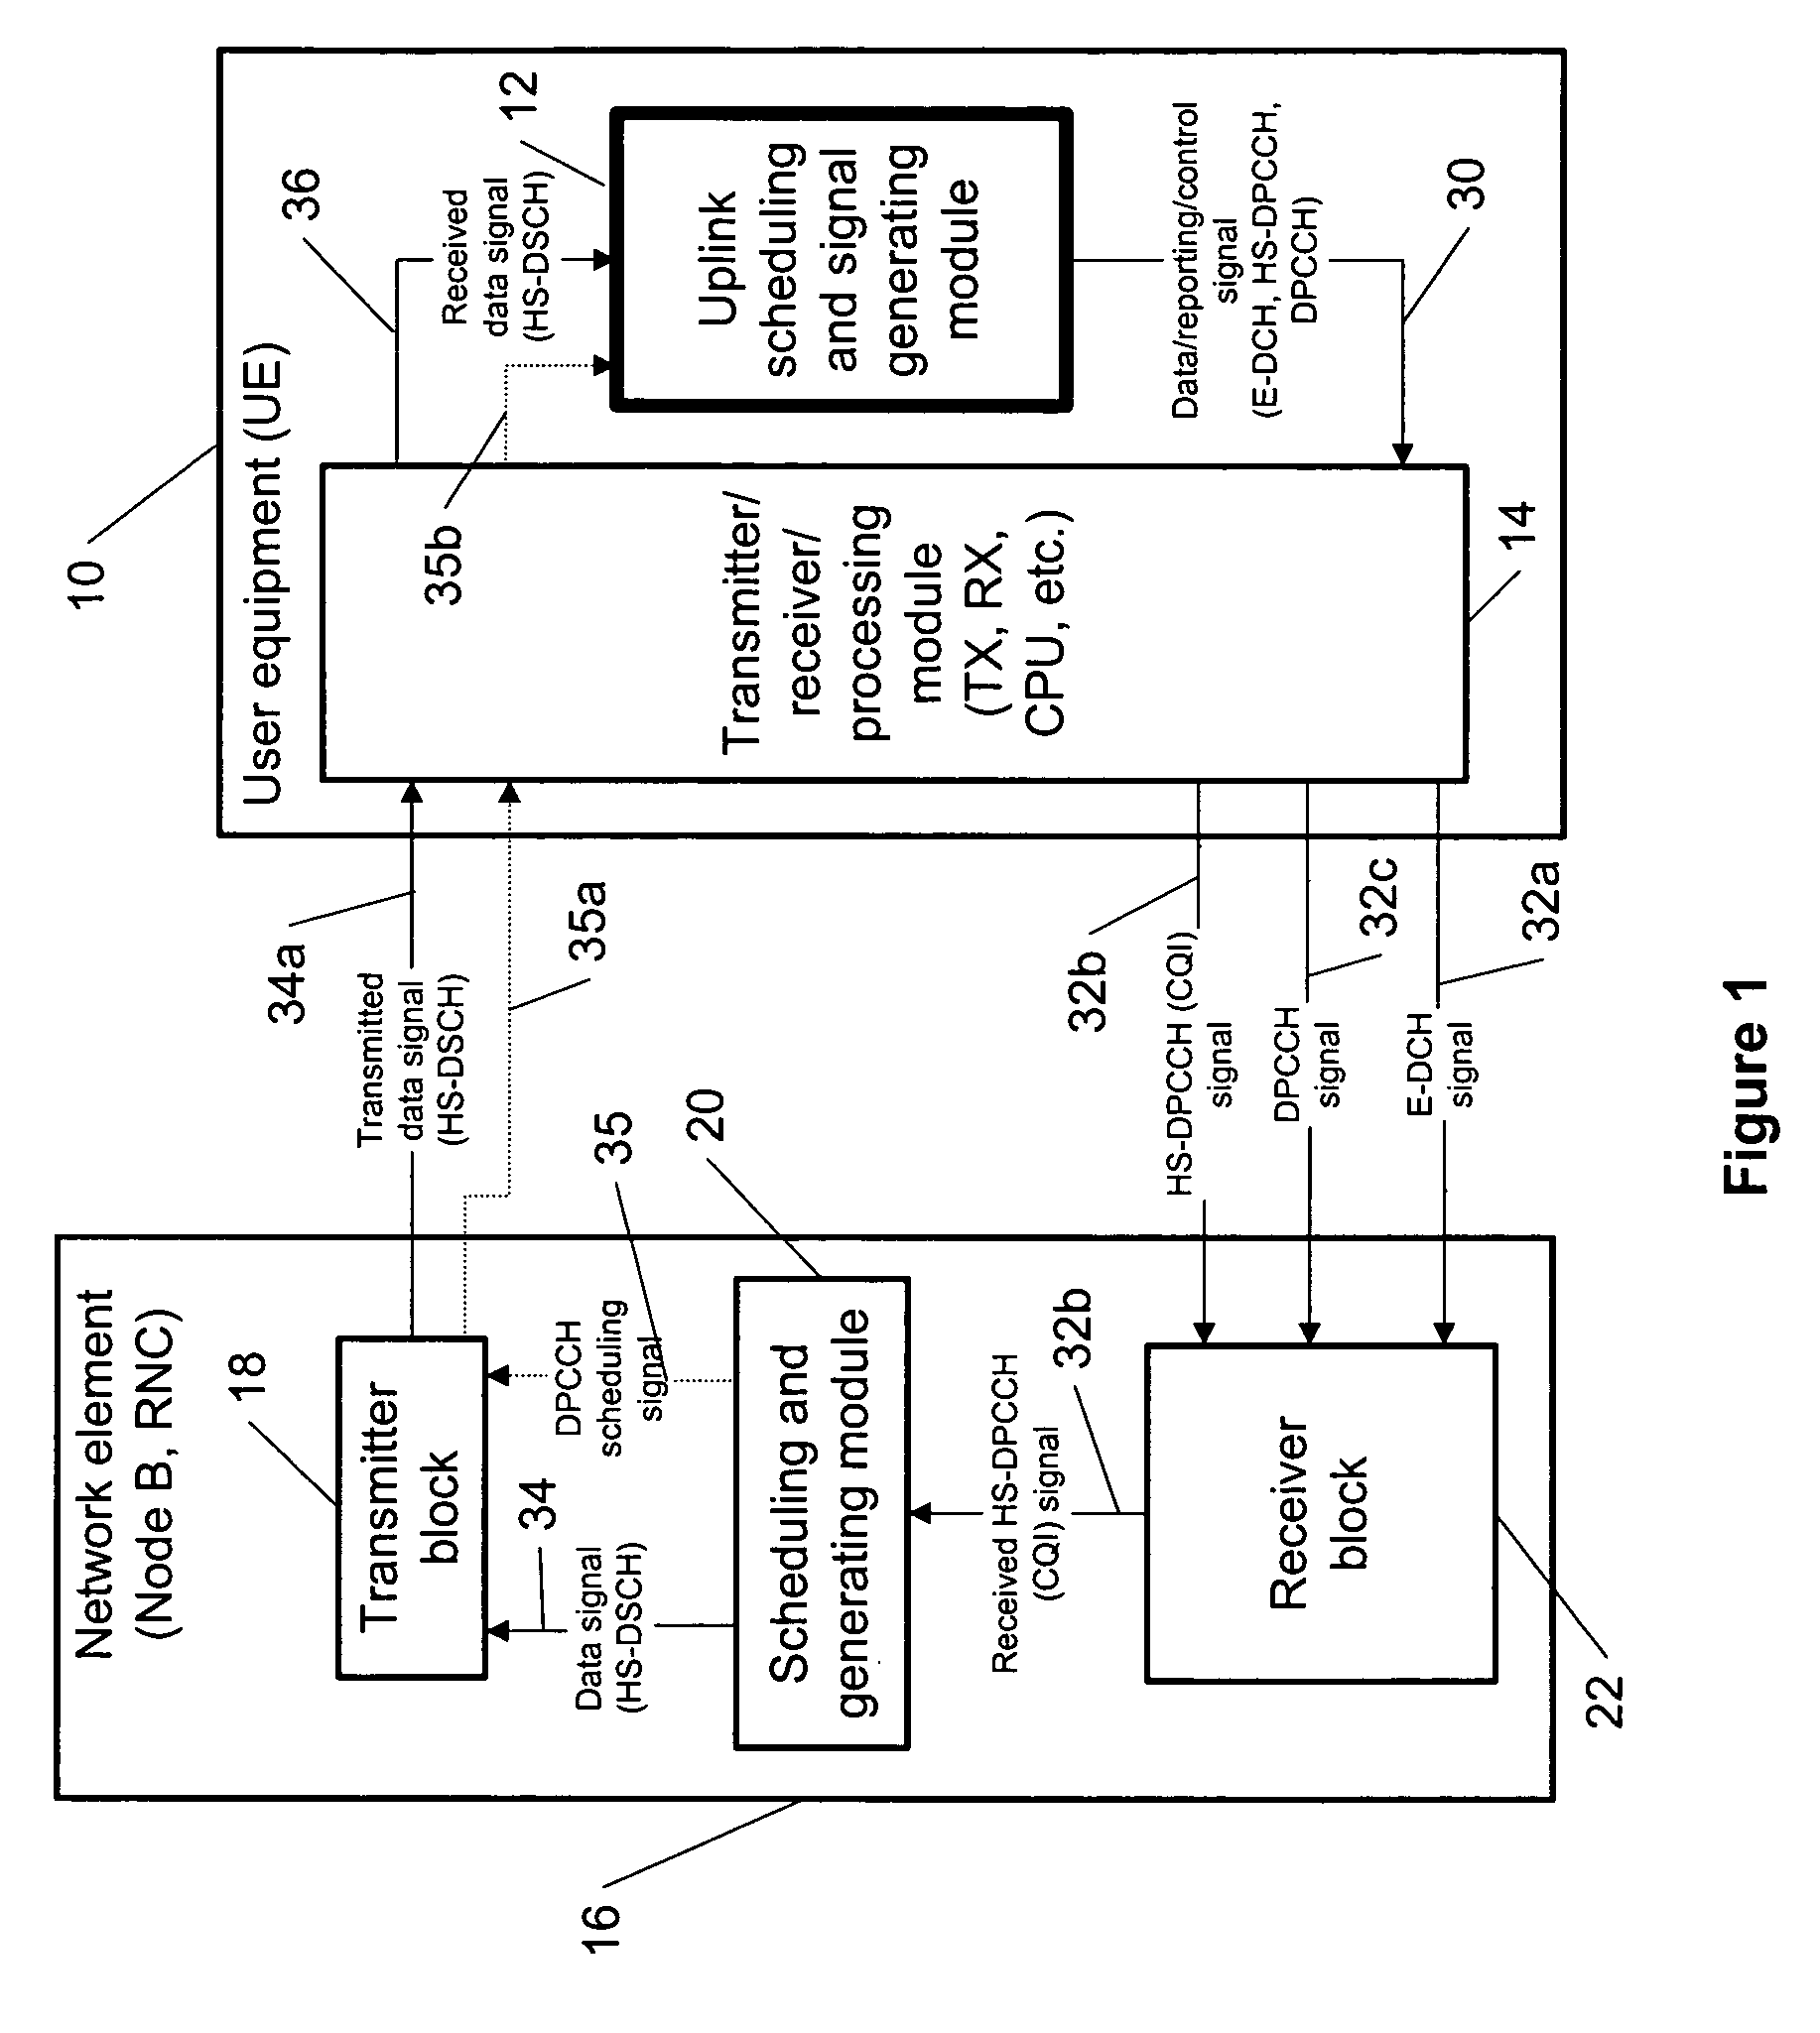 Coordinating uplink control channel gating with channel quality indicator reporting